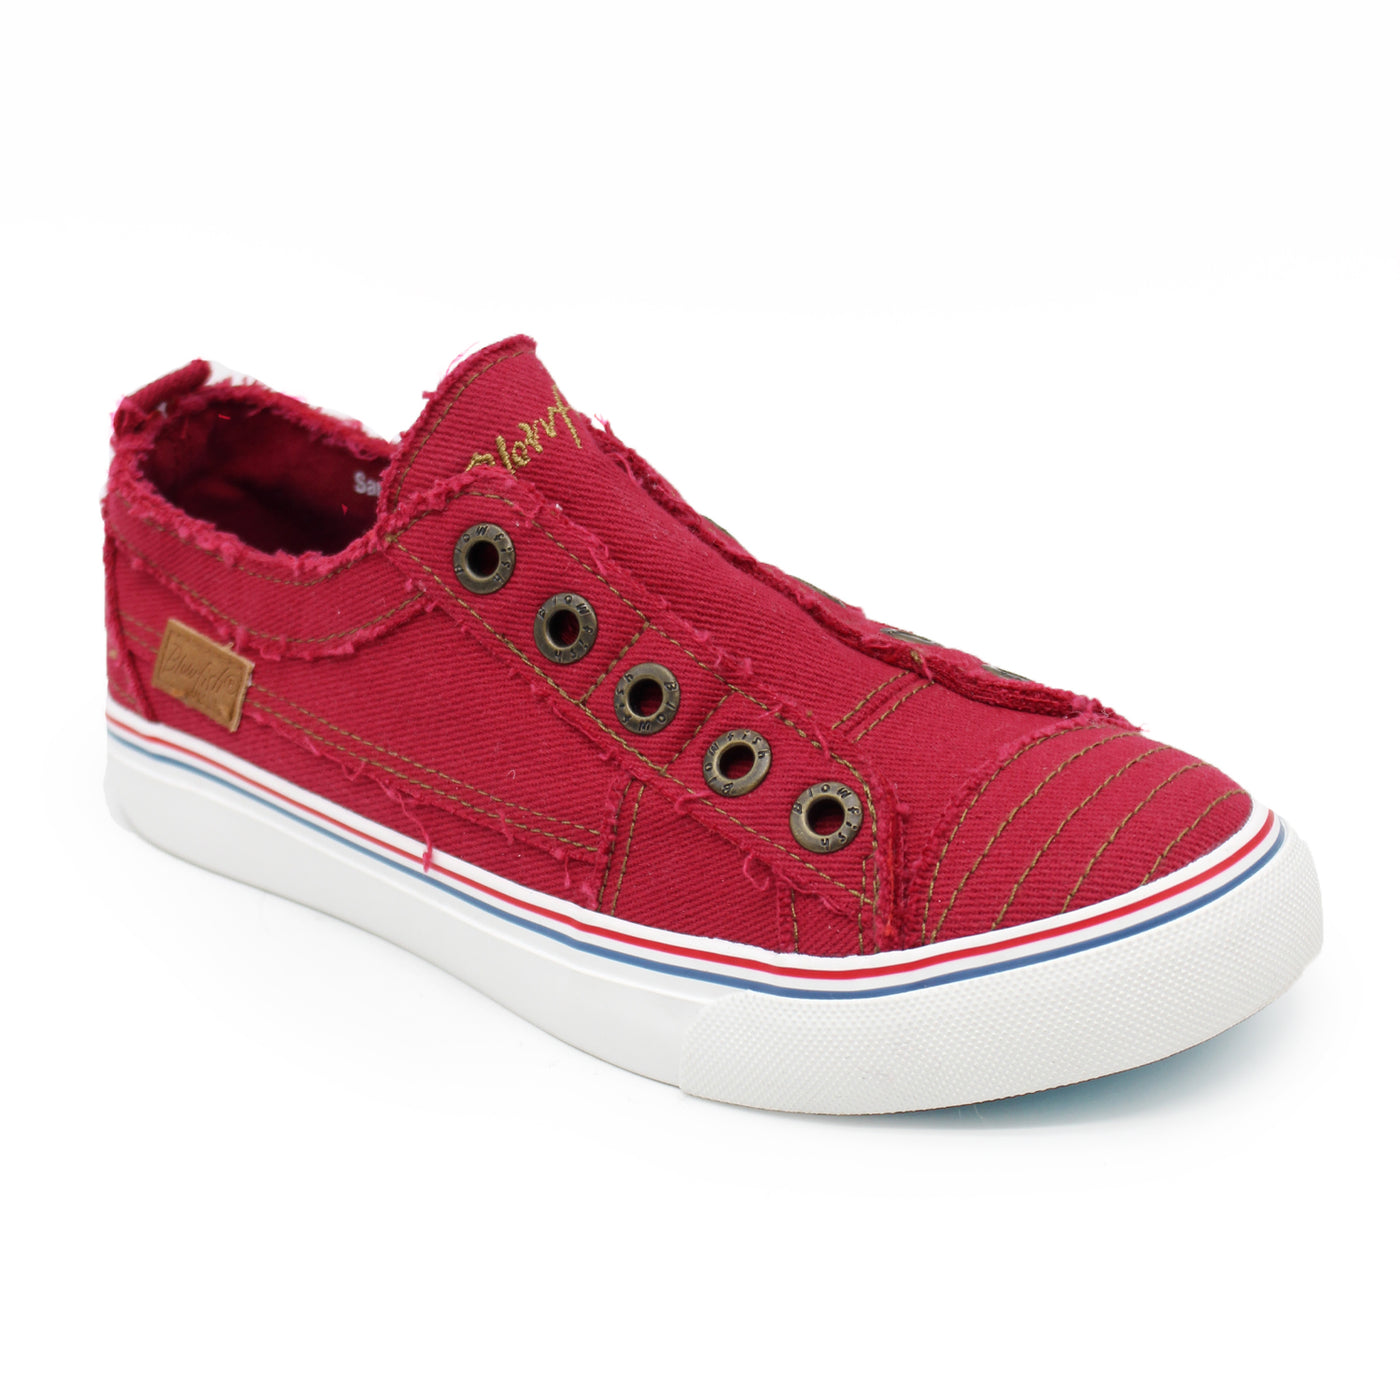 Play Sneakers by Blowfish in Jester Red